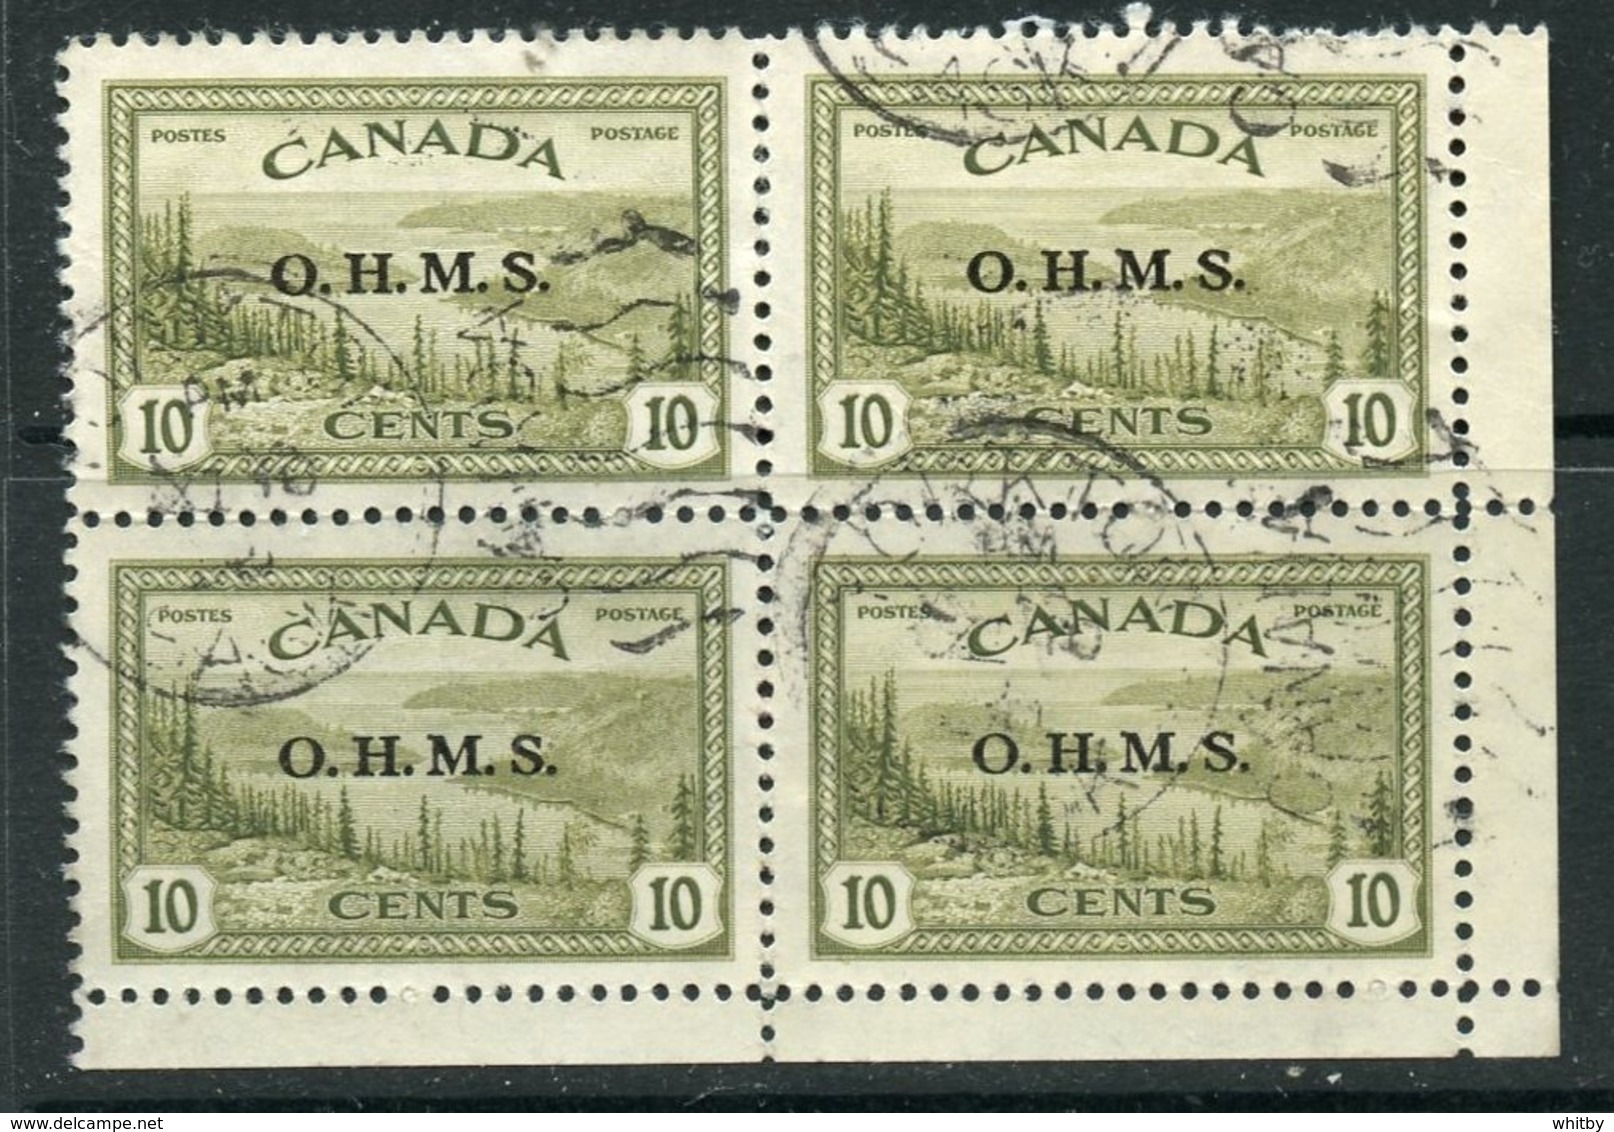 Canada 1949 Official 10 Cent Great Bear Lake  Issue Overprinted OHMS #O6 Block Of 4 - Sobrecargados